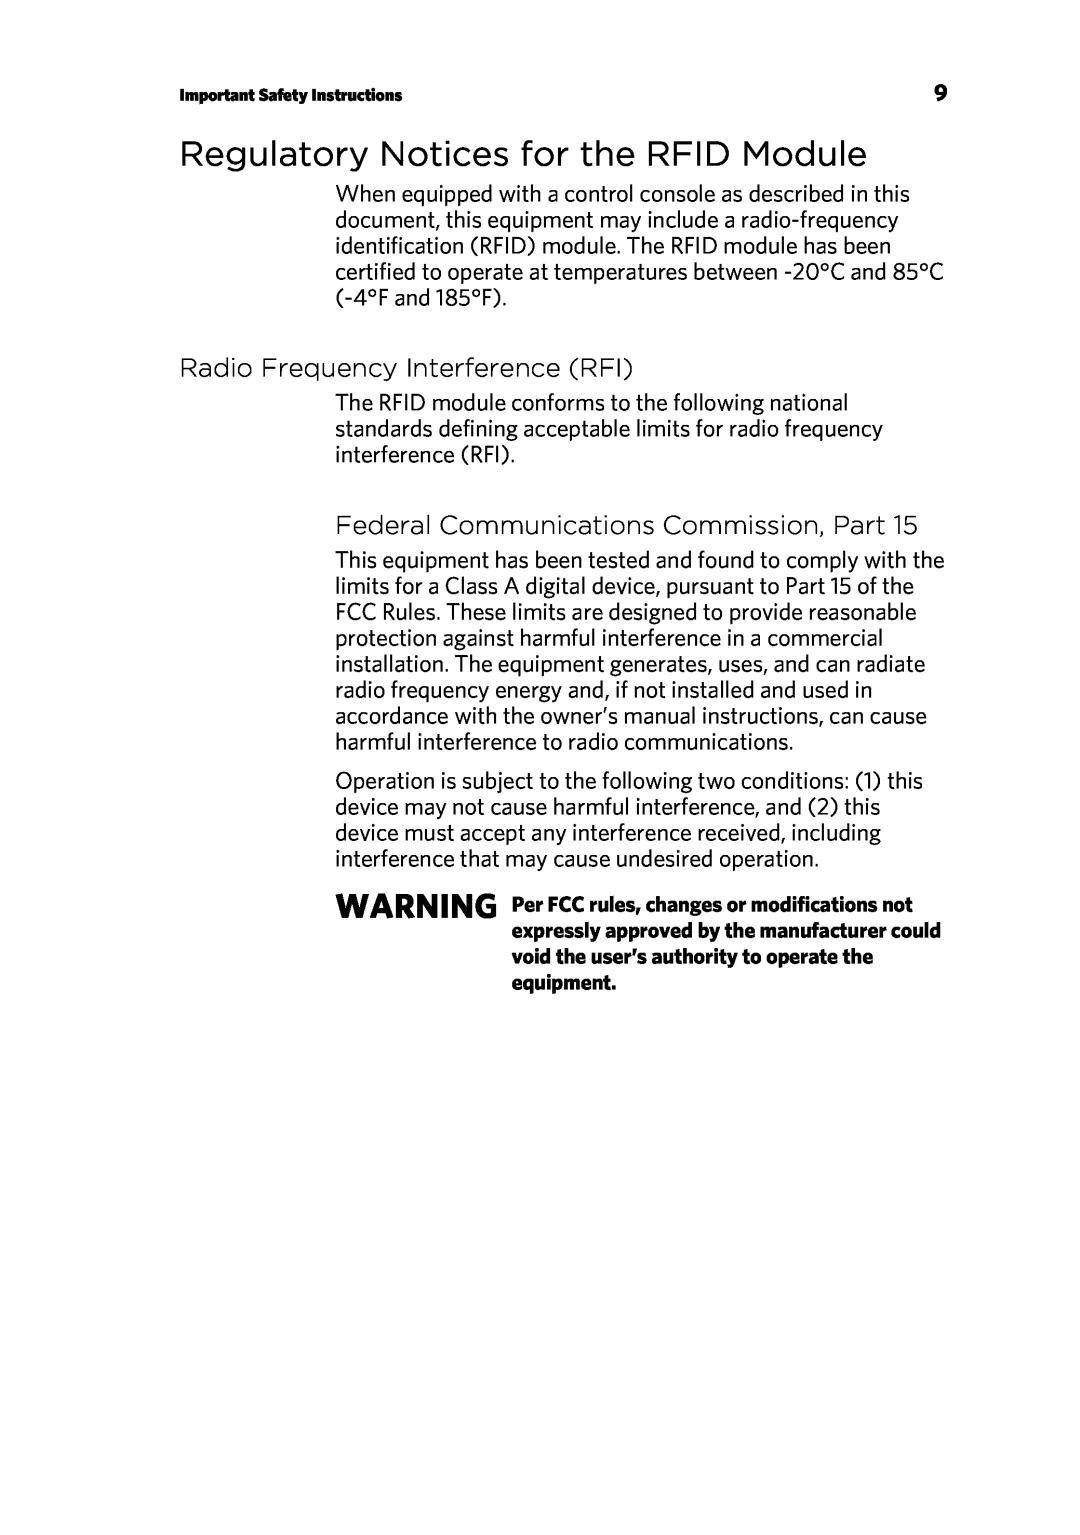 Precor P30 manual Regulatory Notices for the RFID Module, Radio Frequency Interference RFI 